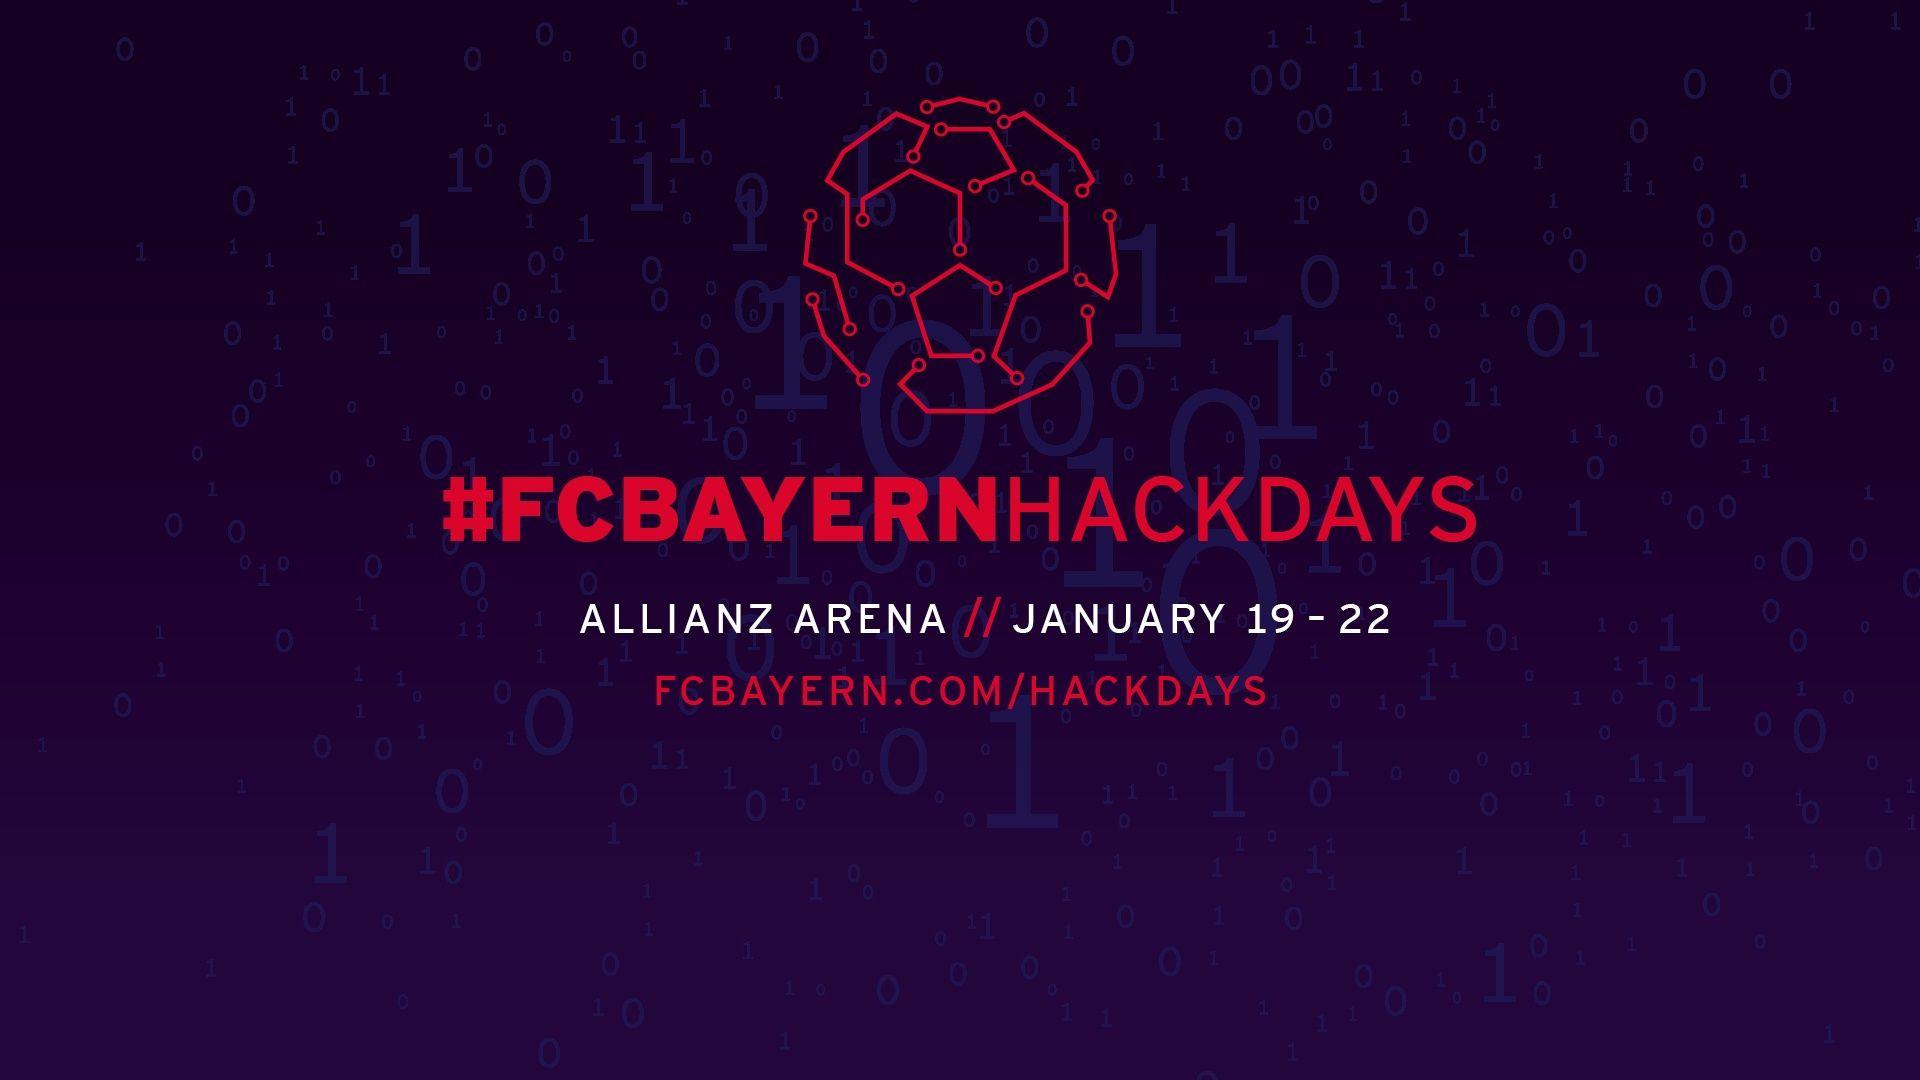 FC Bayern Munich To Host HackDays To Drive New Fan Experiences